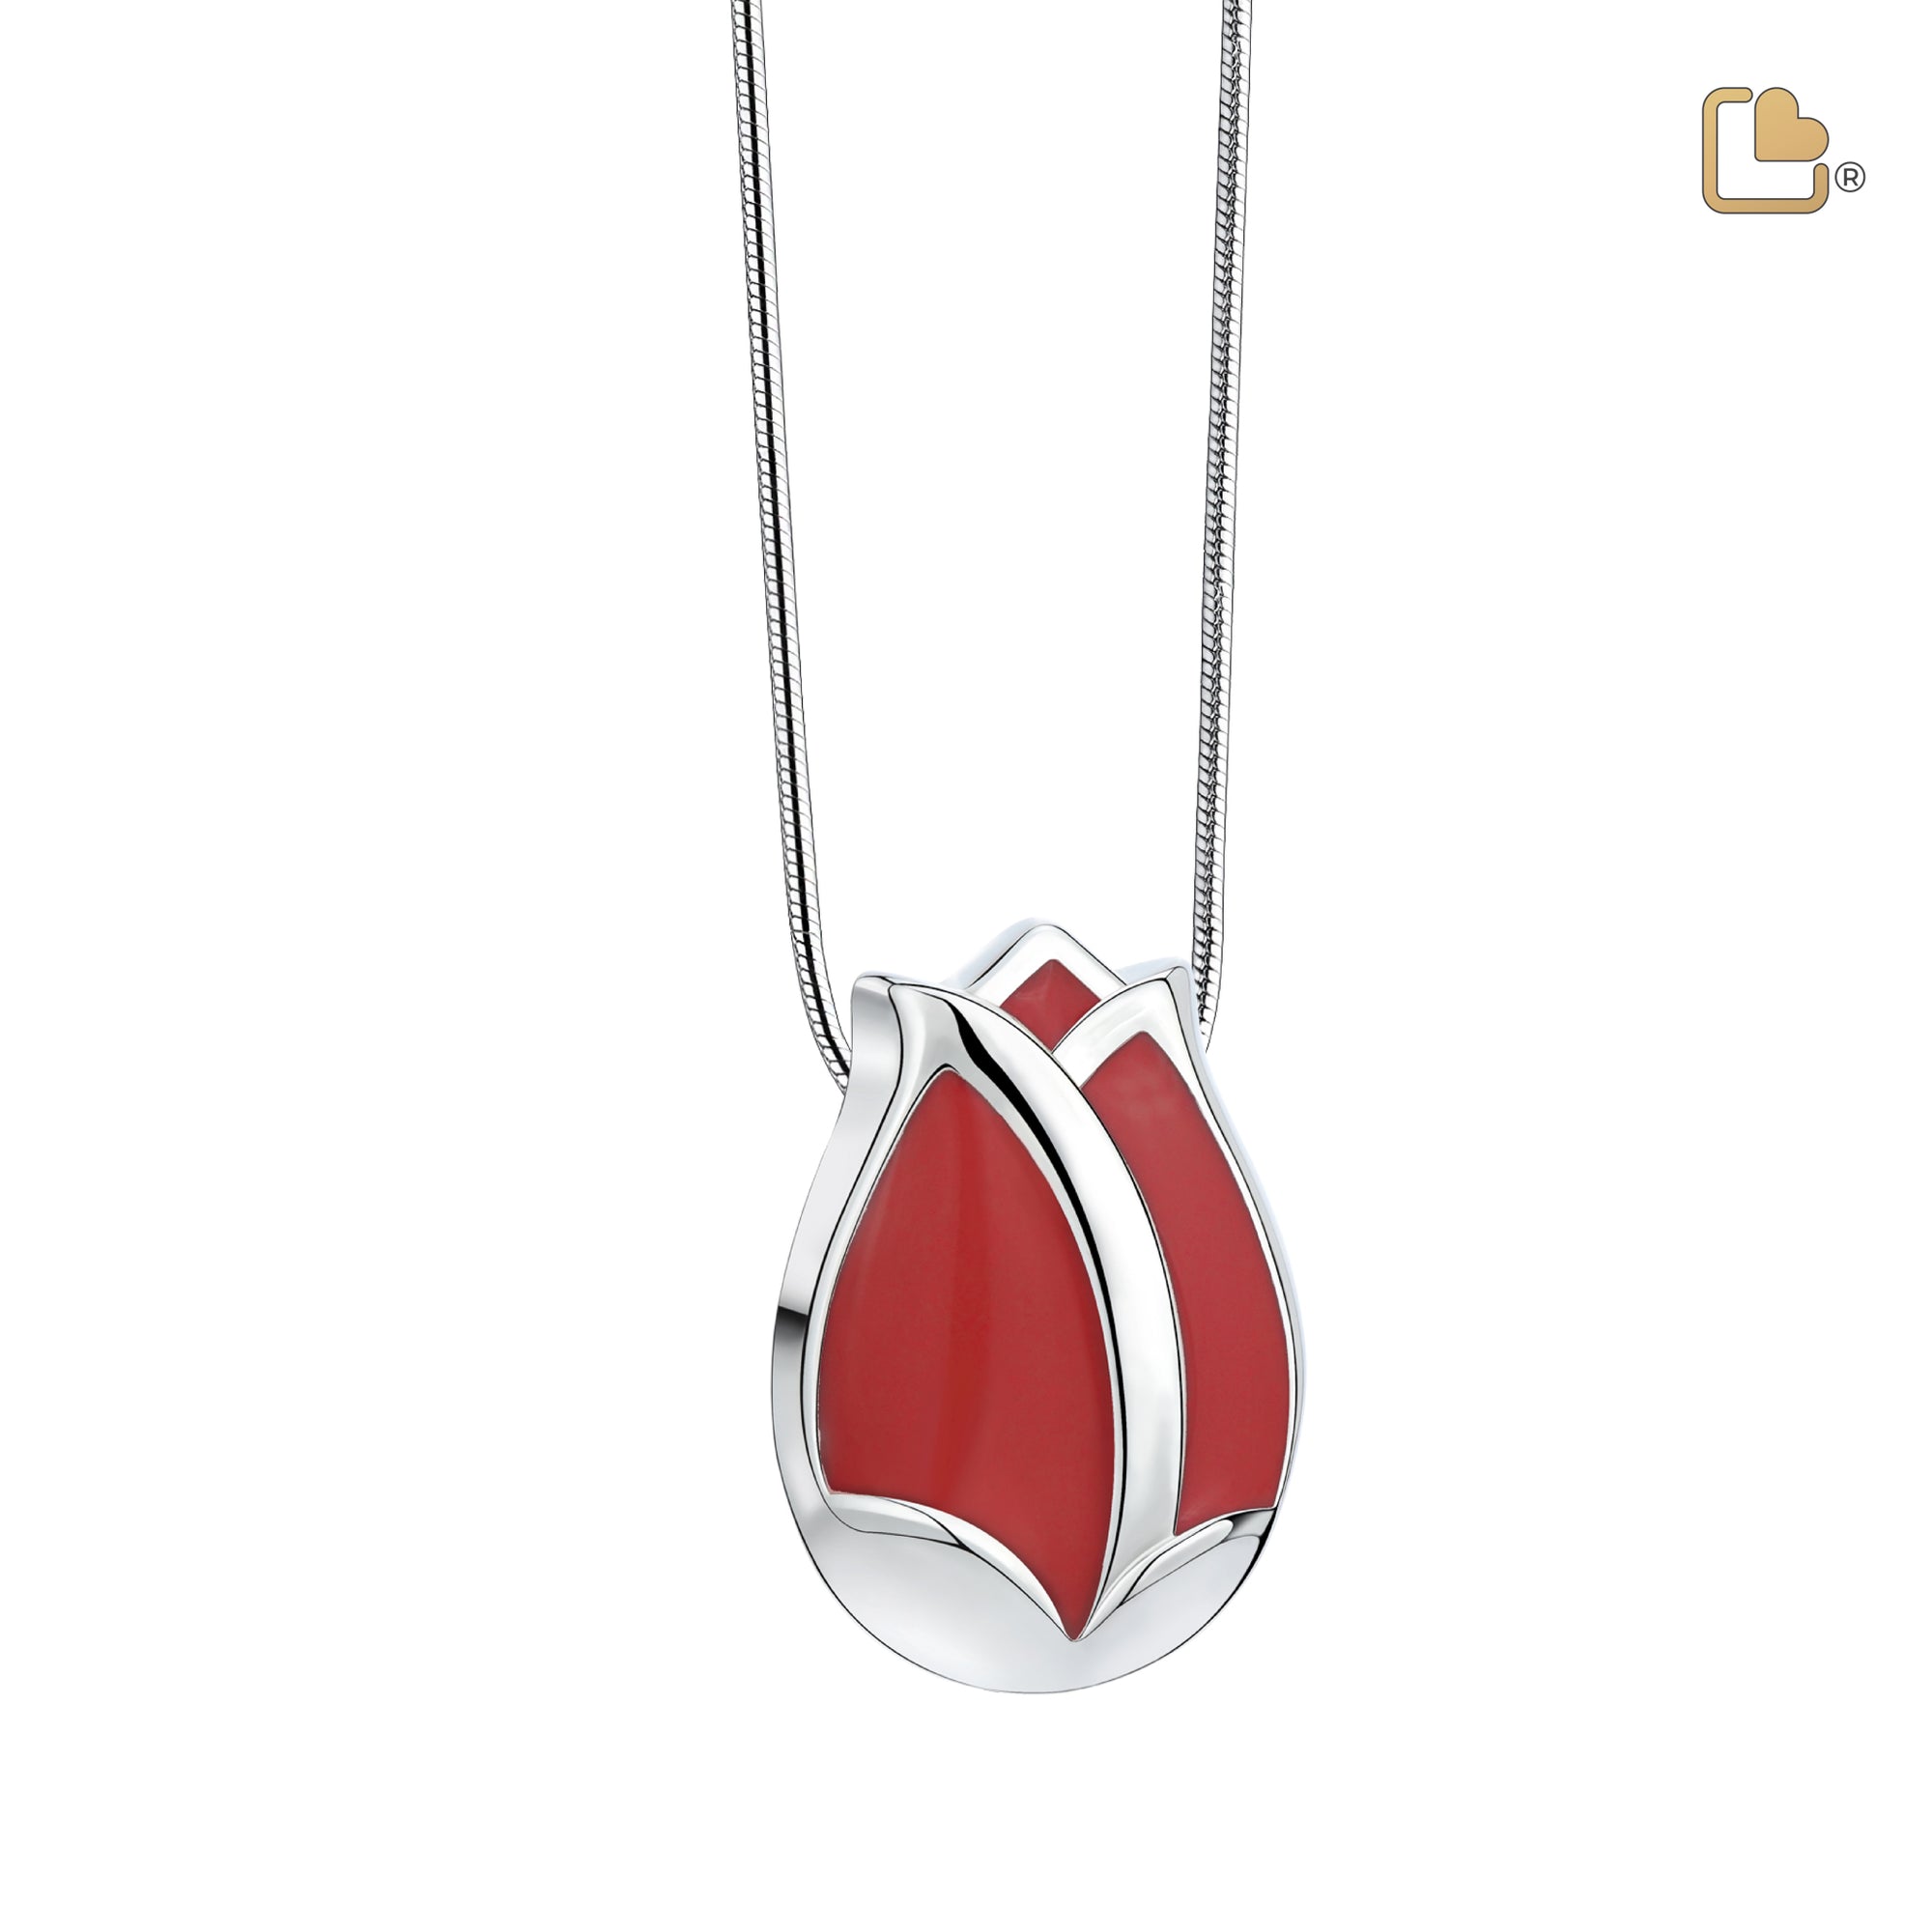 Tulipª Ashes Pendant Pearl Red & Polished Silver